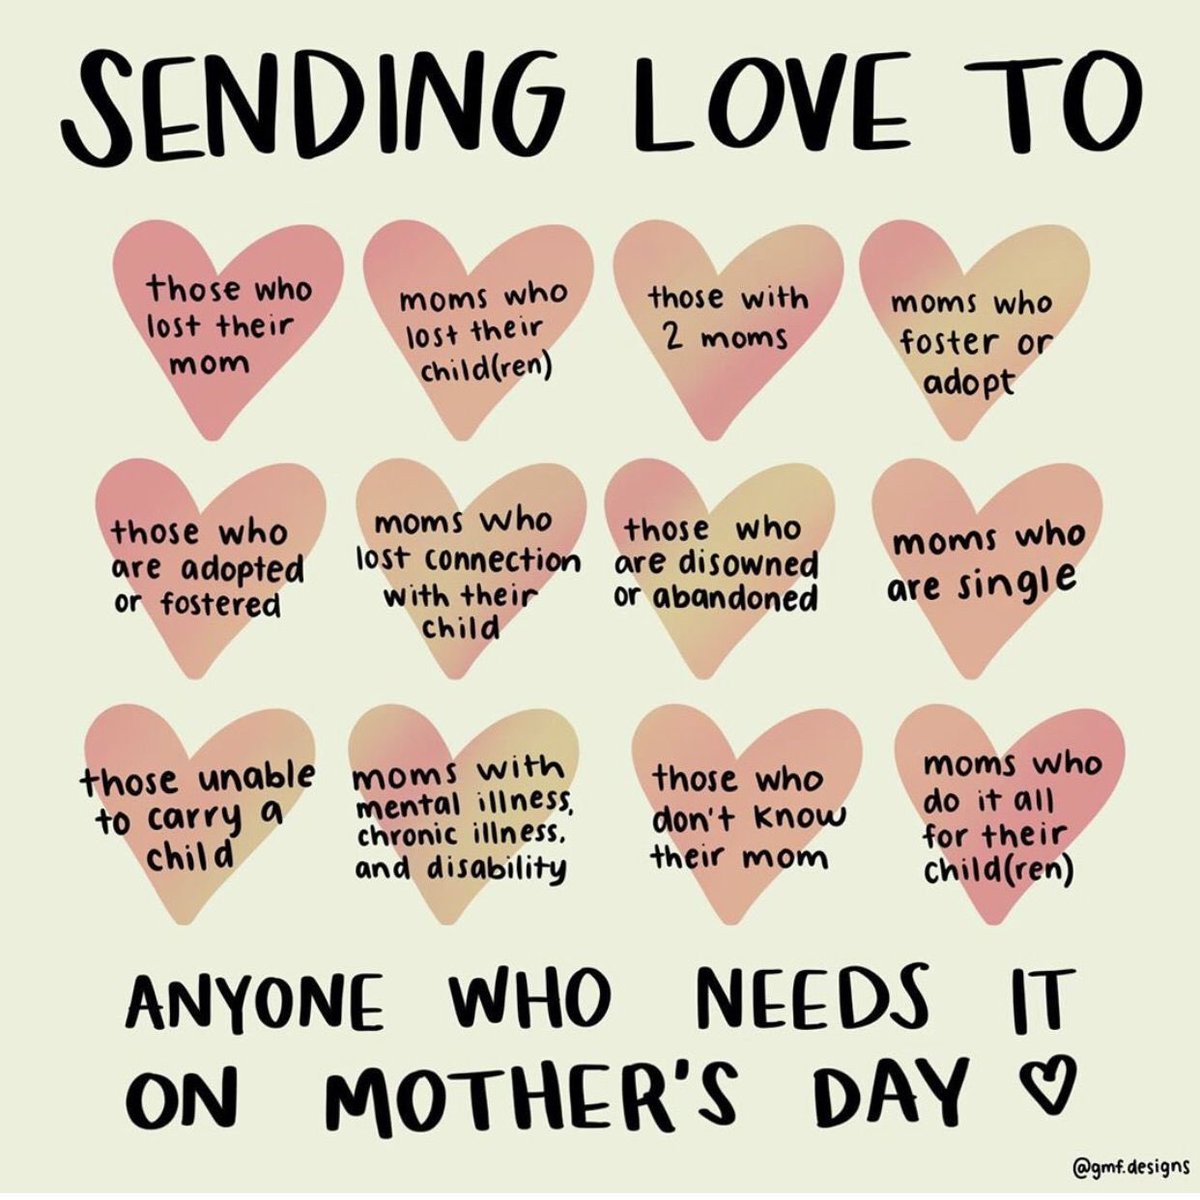 On this special day, let’s try to remember there are many definitions of a mom. Let’s celebrate them all!! And especially to those who have lost their mothers! 🫂 ❤️ Happy Mother’s Day to all the moms!!